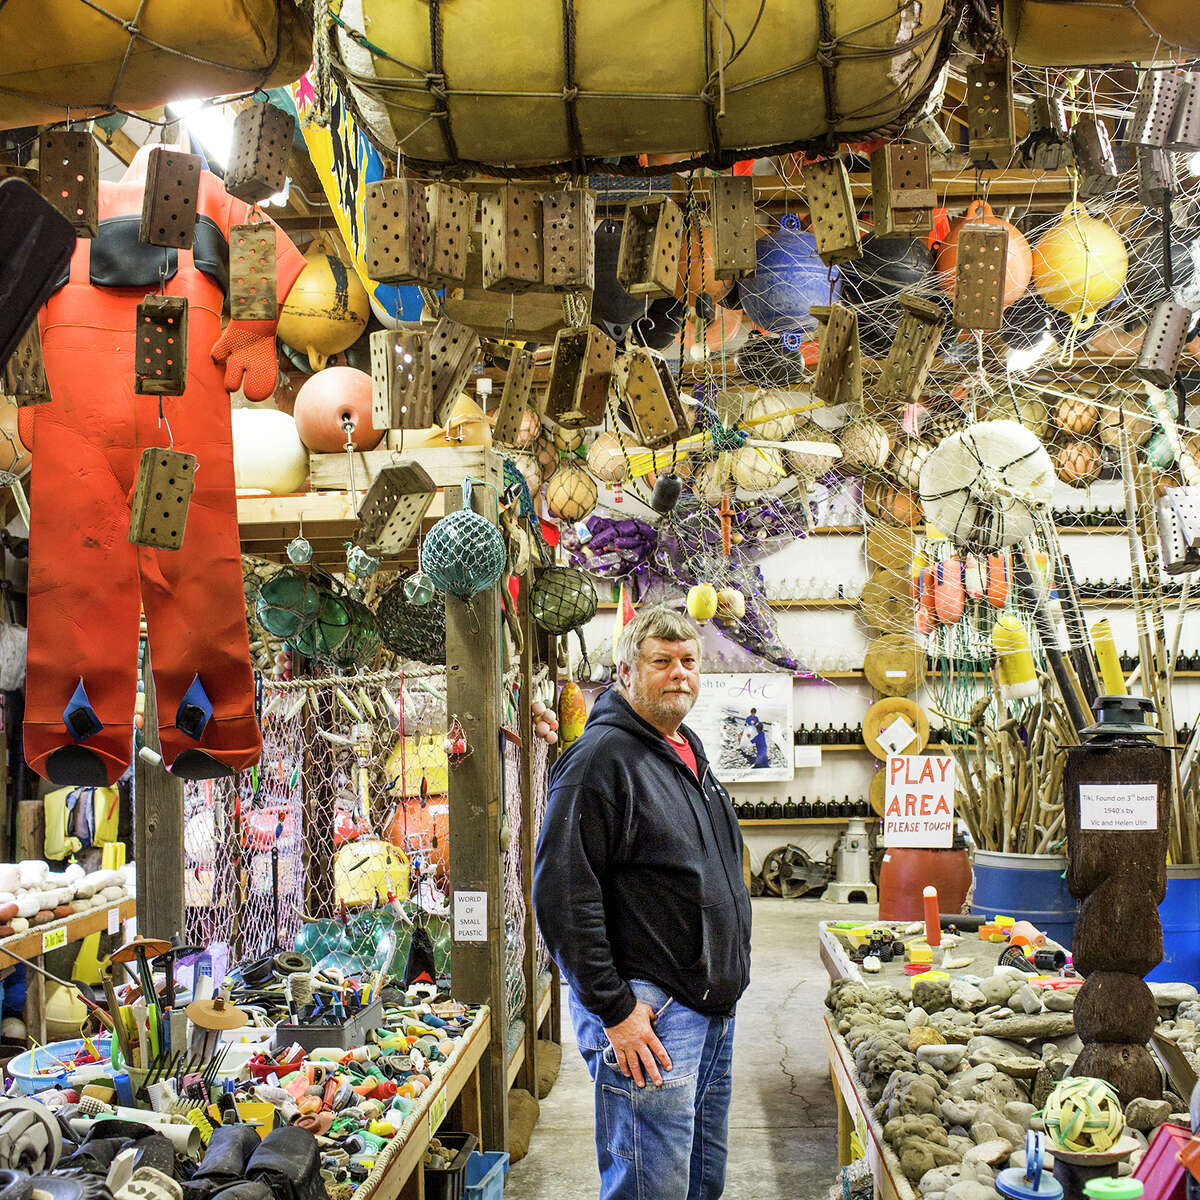 Here, John Anderson explores hundreds of gathered goods lost at sea. Keep clicking for more of Washington's quirkiest museums.